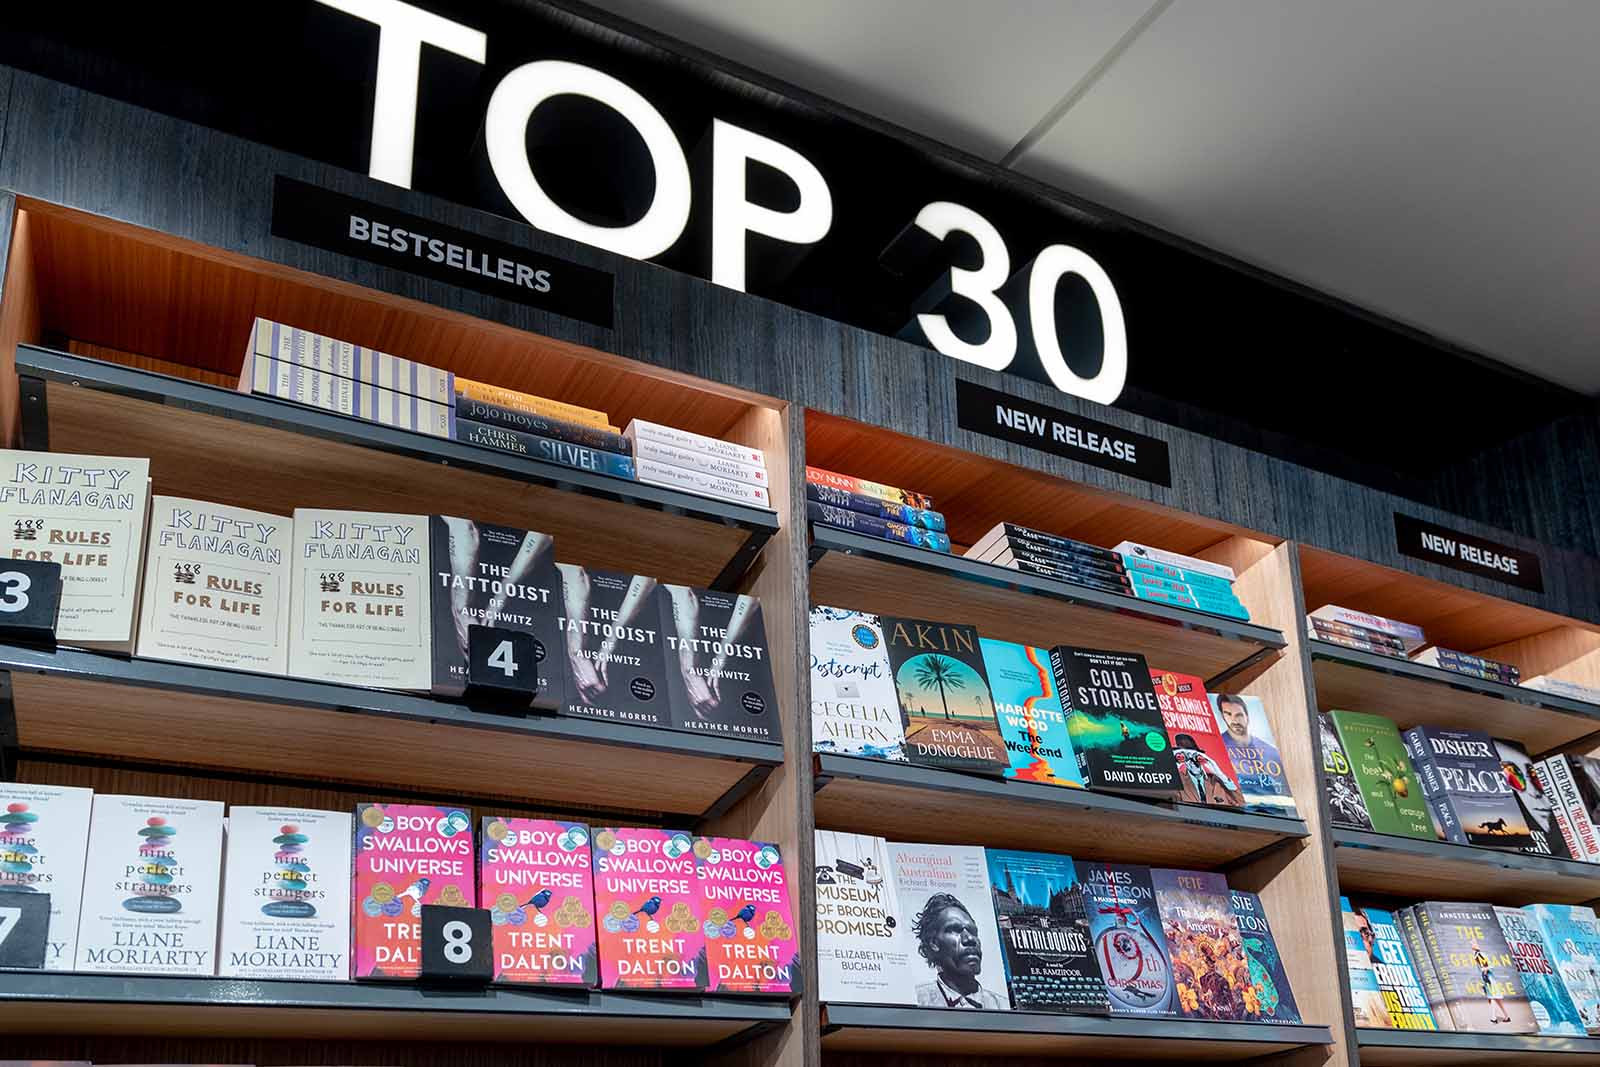 News@BNE and News Travels stock all the best selling books | Best Airport Reads: Where to buy a book at Brisbane Airport